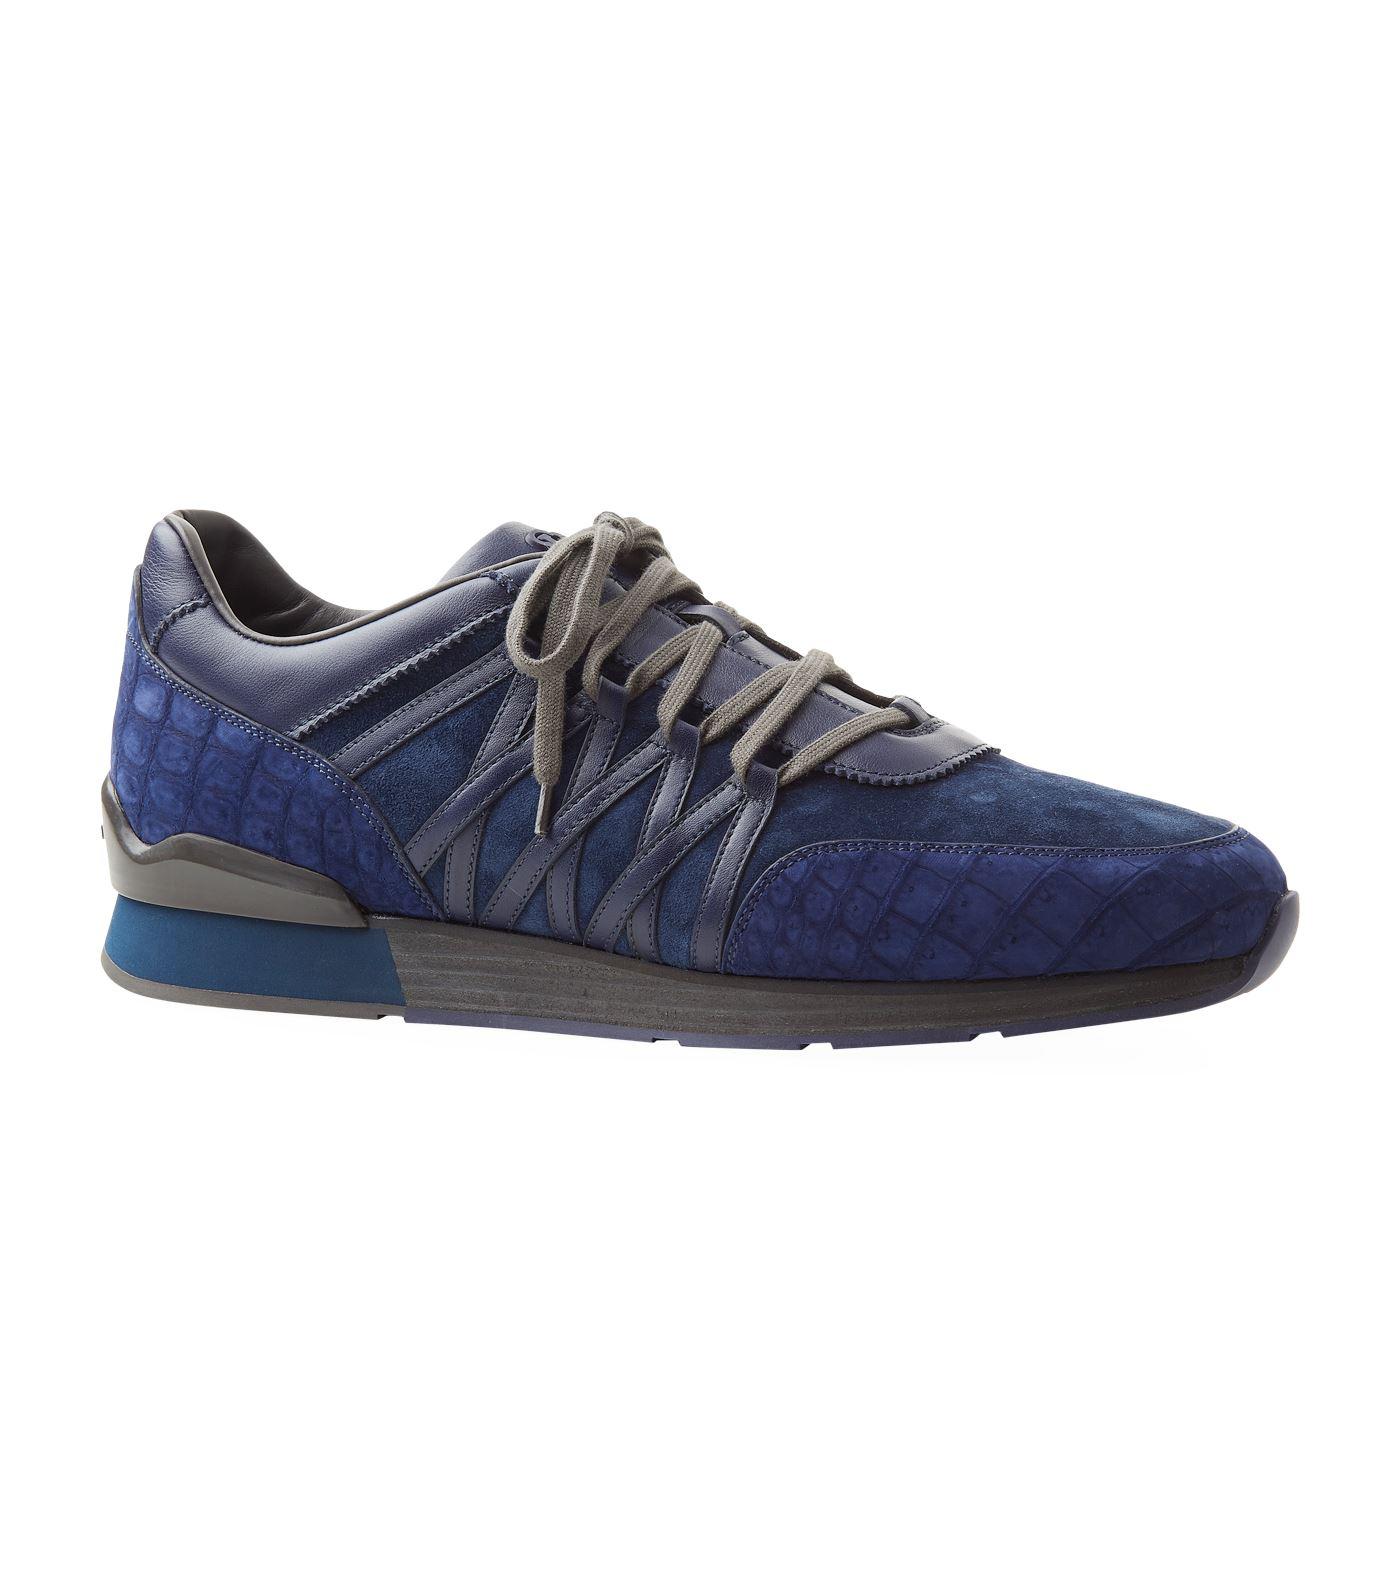 Stefano Ricci Olympia Suede And Crocodile Trim Sneakers in Navy (Blue ...